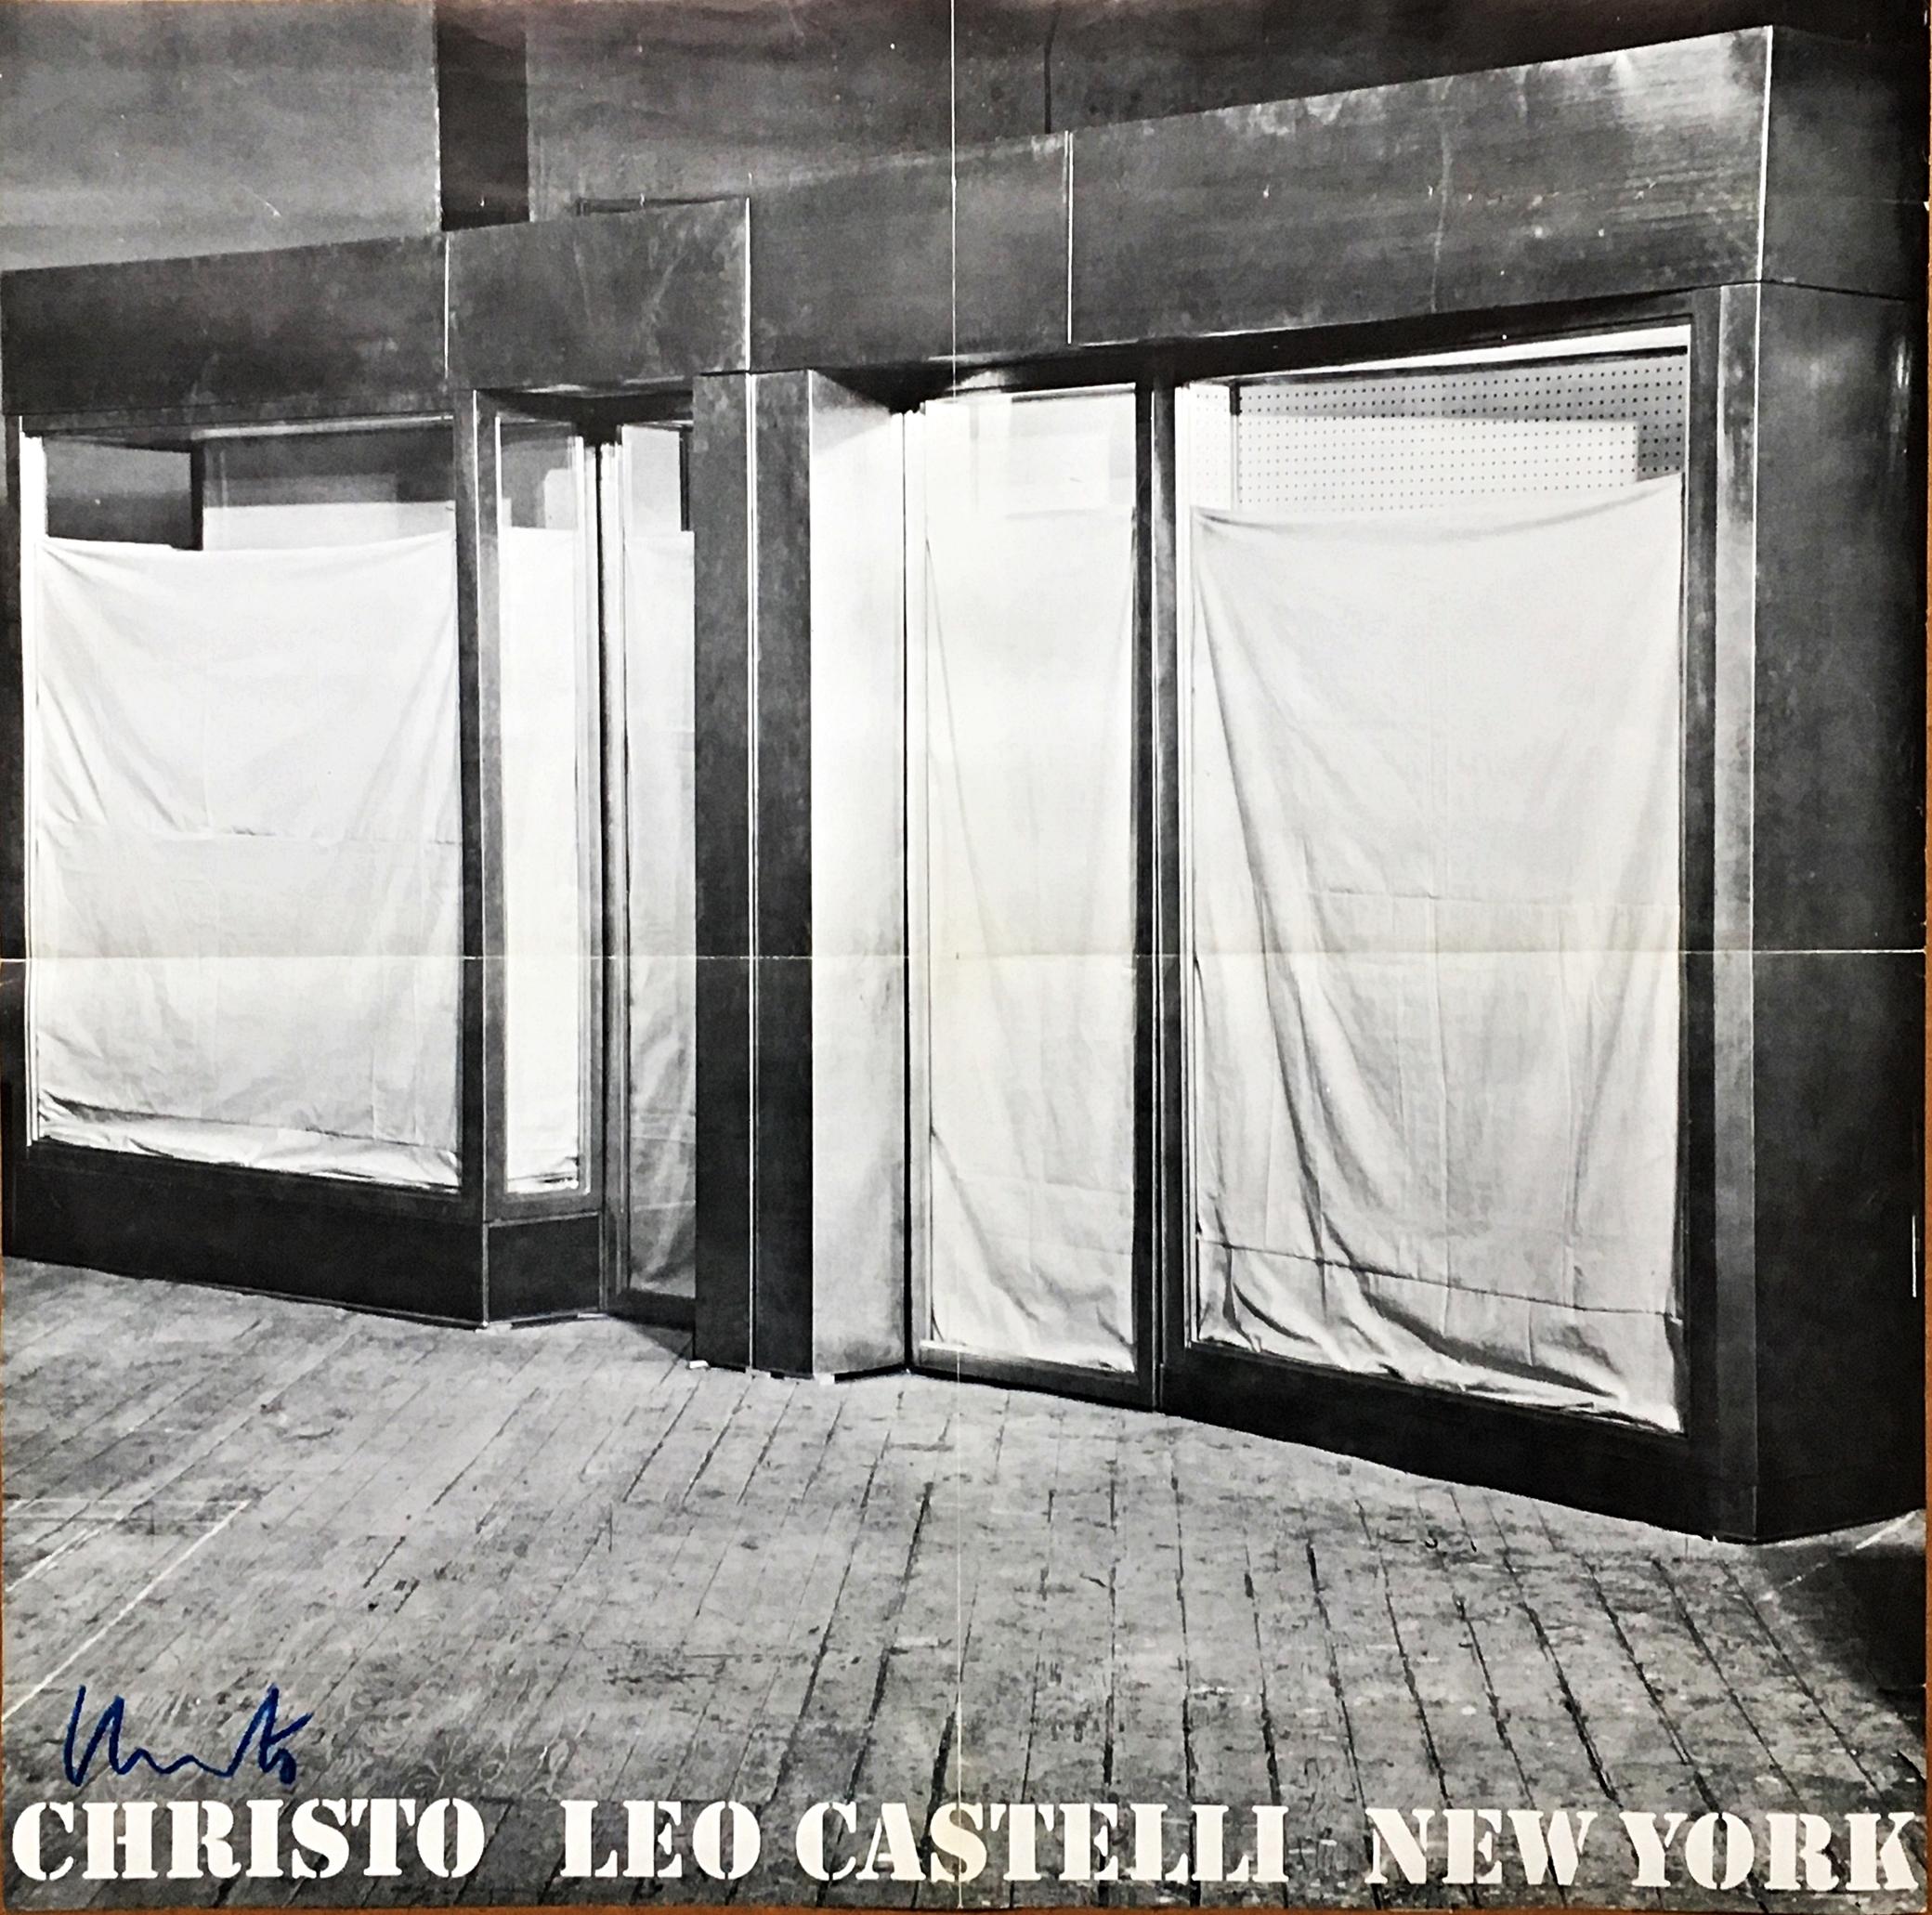 Christo
Christo at Leo Castelli Gallery New York (Hand Signed), 1966
Rare Offset Lithograph Poster announcement
Boldly hand signed by Christo in blue marker on the lower left front. Addressed to the influential (legendary) art critic Pierre Restany